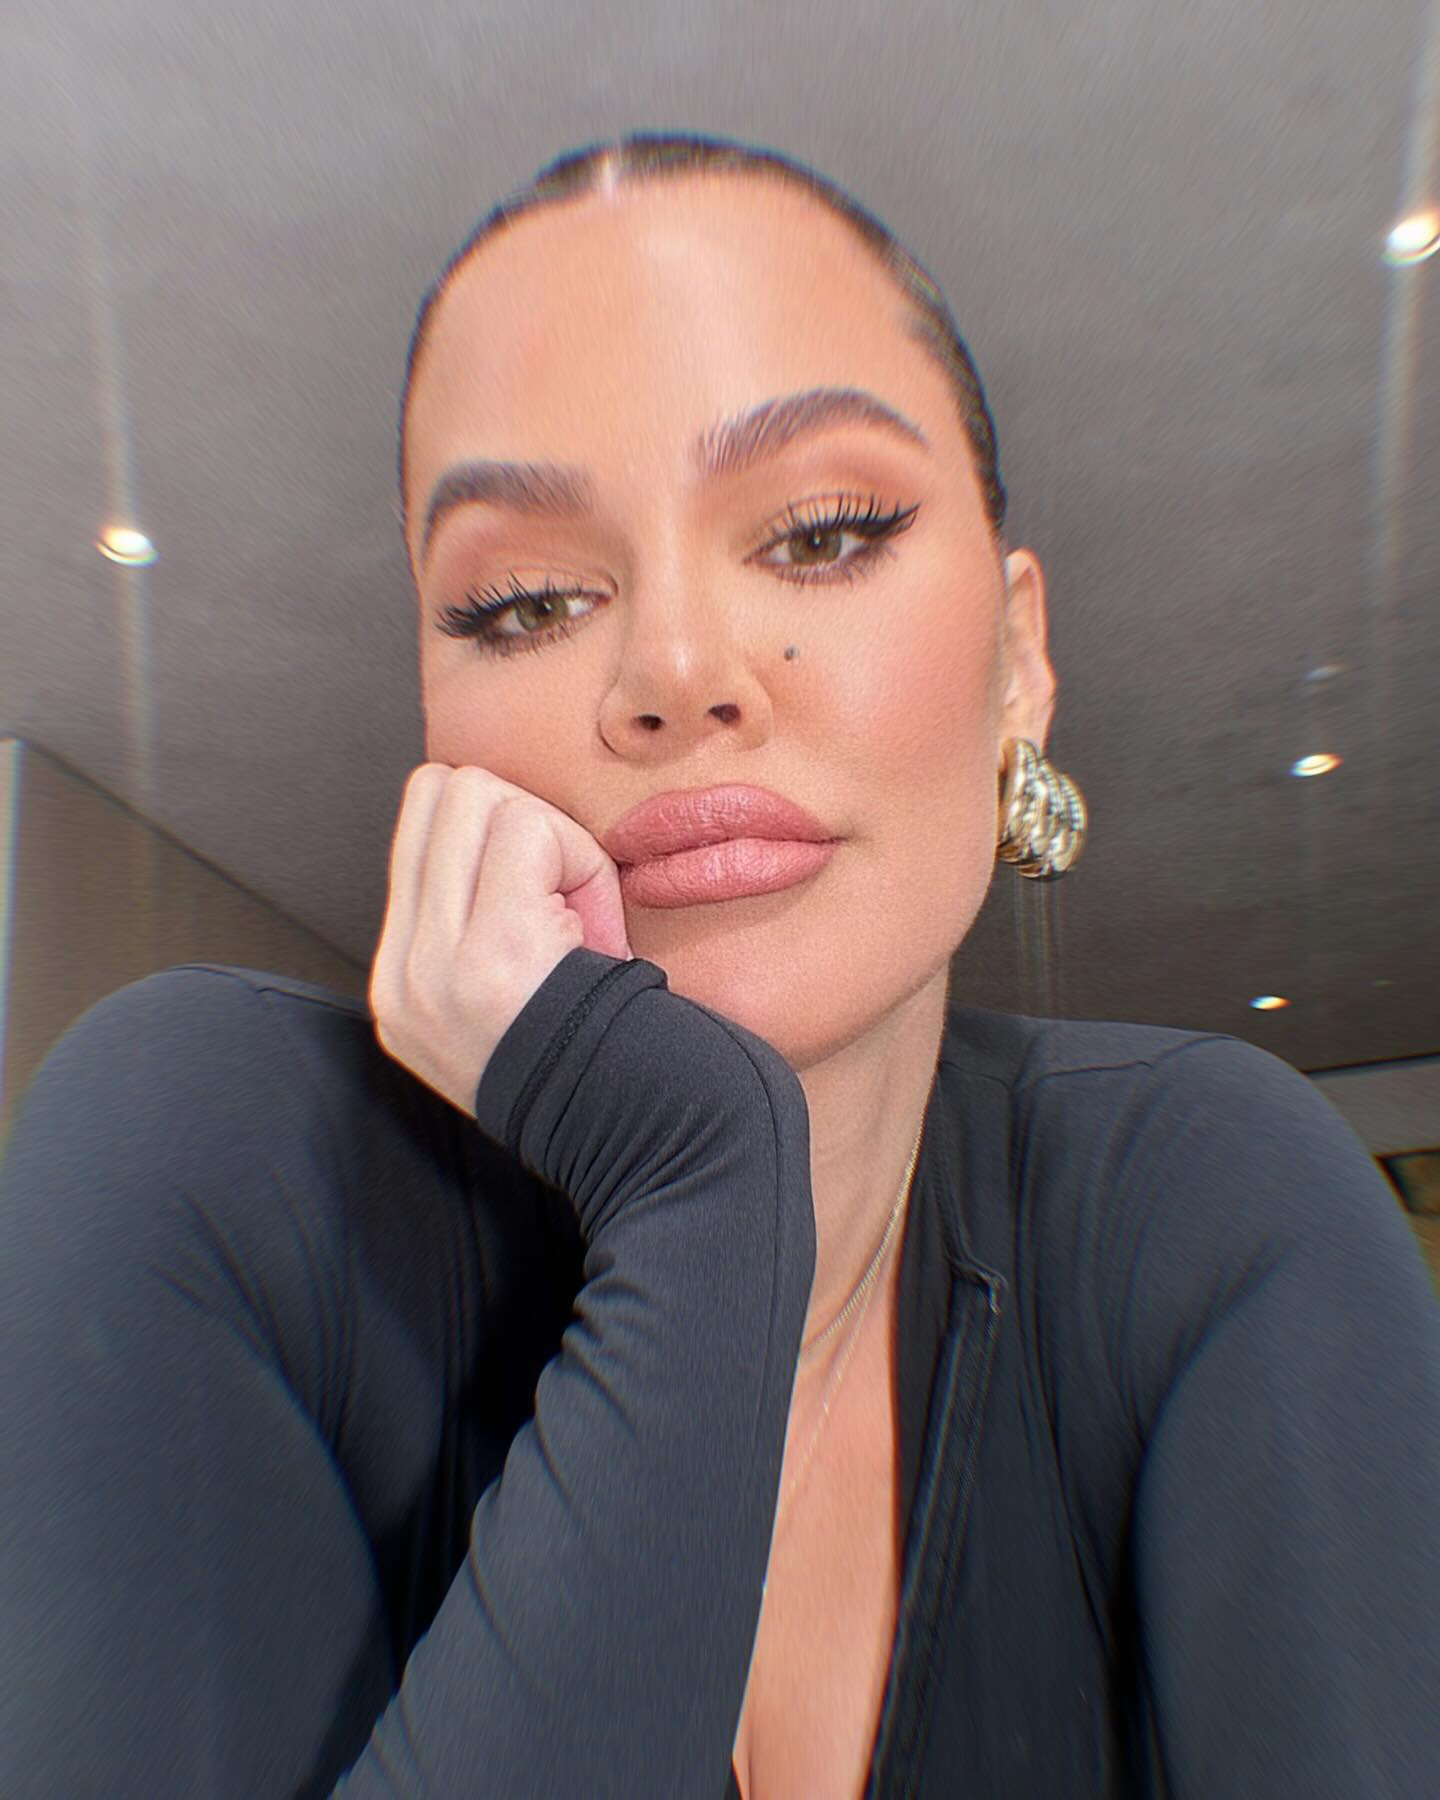 The Kardashians star clapped back at critics after she was accused of over-editing her photos